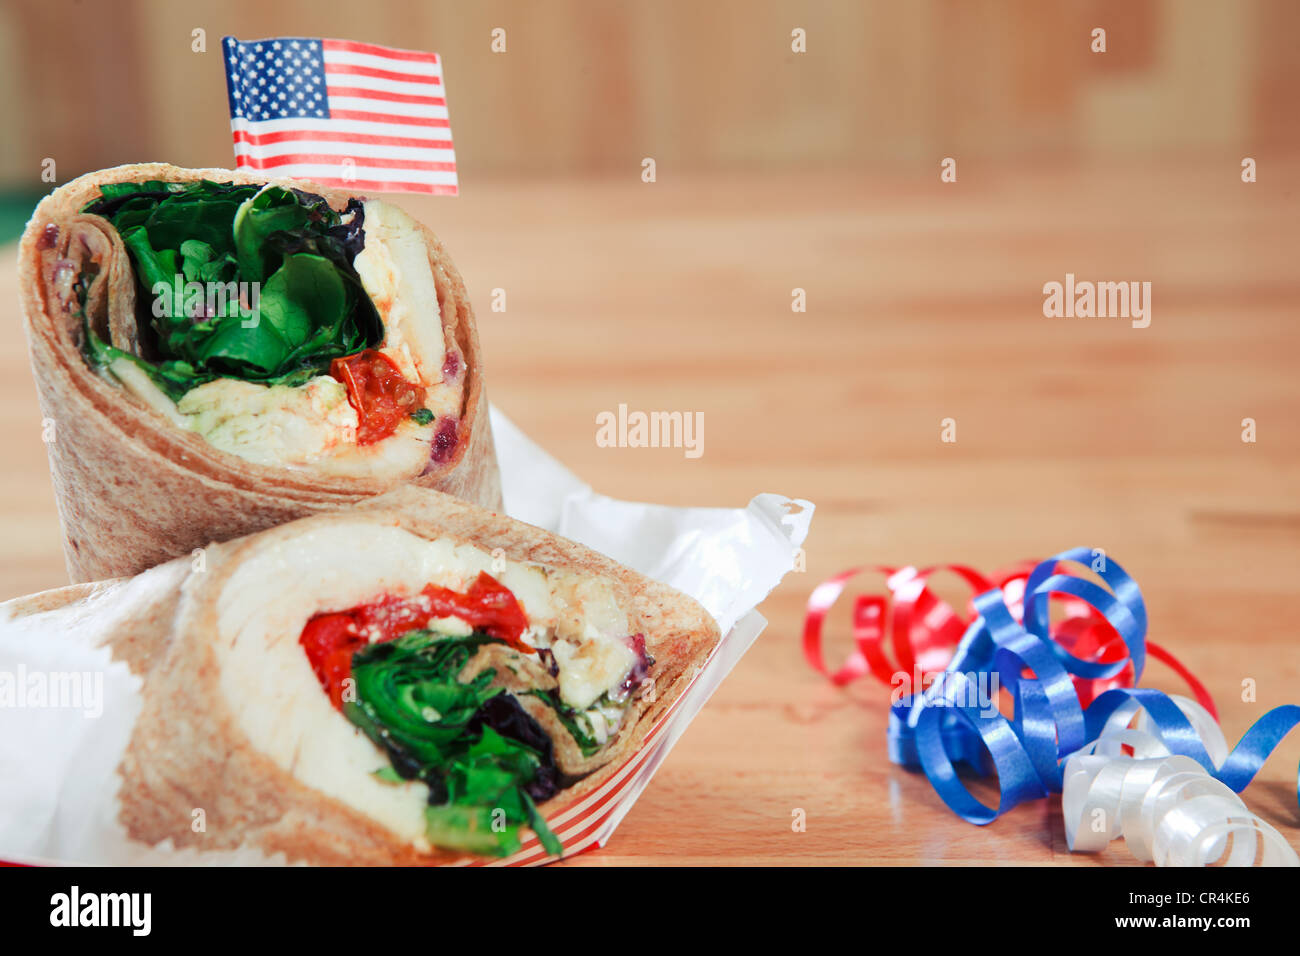 Patriotic Chicken Wrap Sandwich with an American Flag, and red, white and blue decorations. Stock Photo